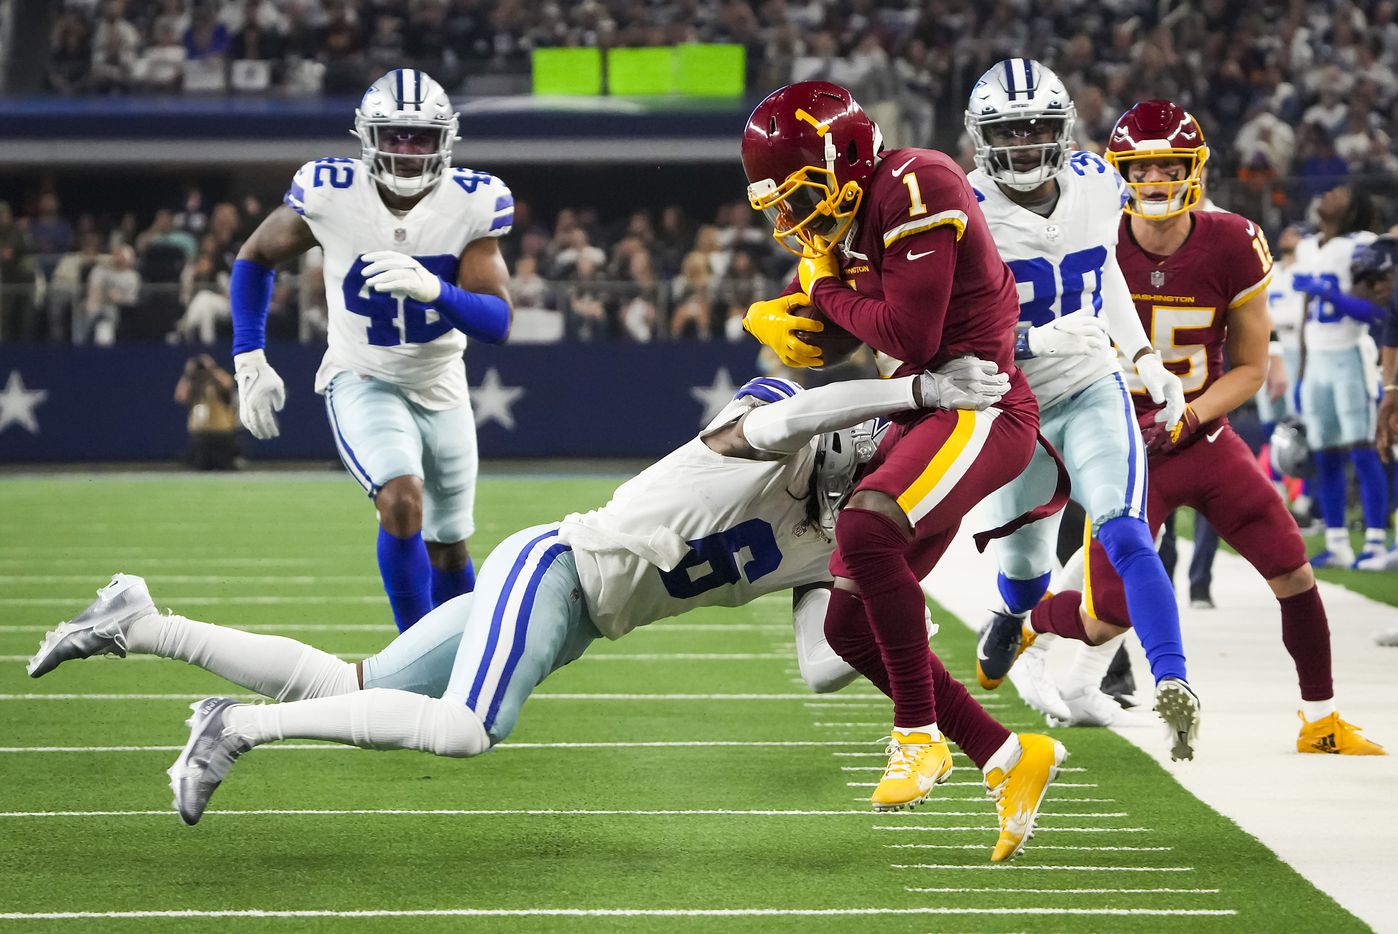 Washington Football Team wide receiver DeAndre Carter (1) is pushed out of bounds by Dallas Cowboys safety Donovan Wilson (6) during the first half of an NFL football game at AT&T Stadium on Sunday, Dec. 26, 2021, in Arlington.